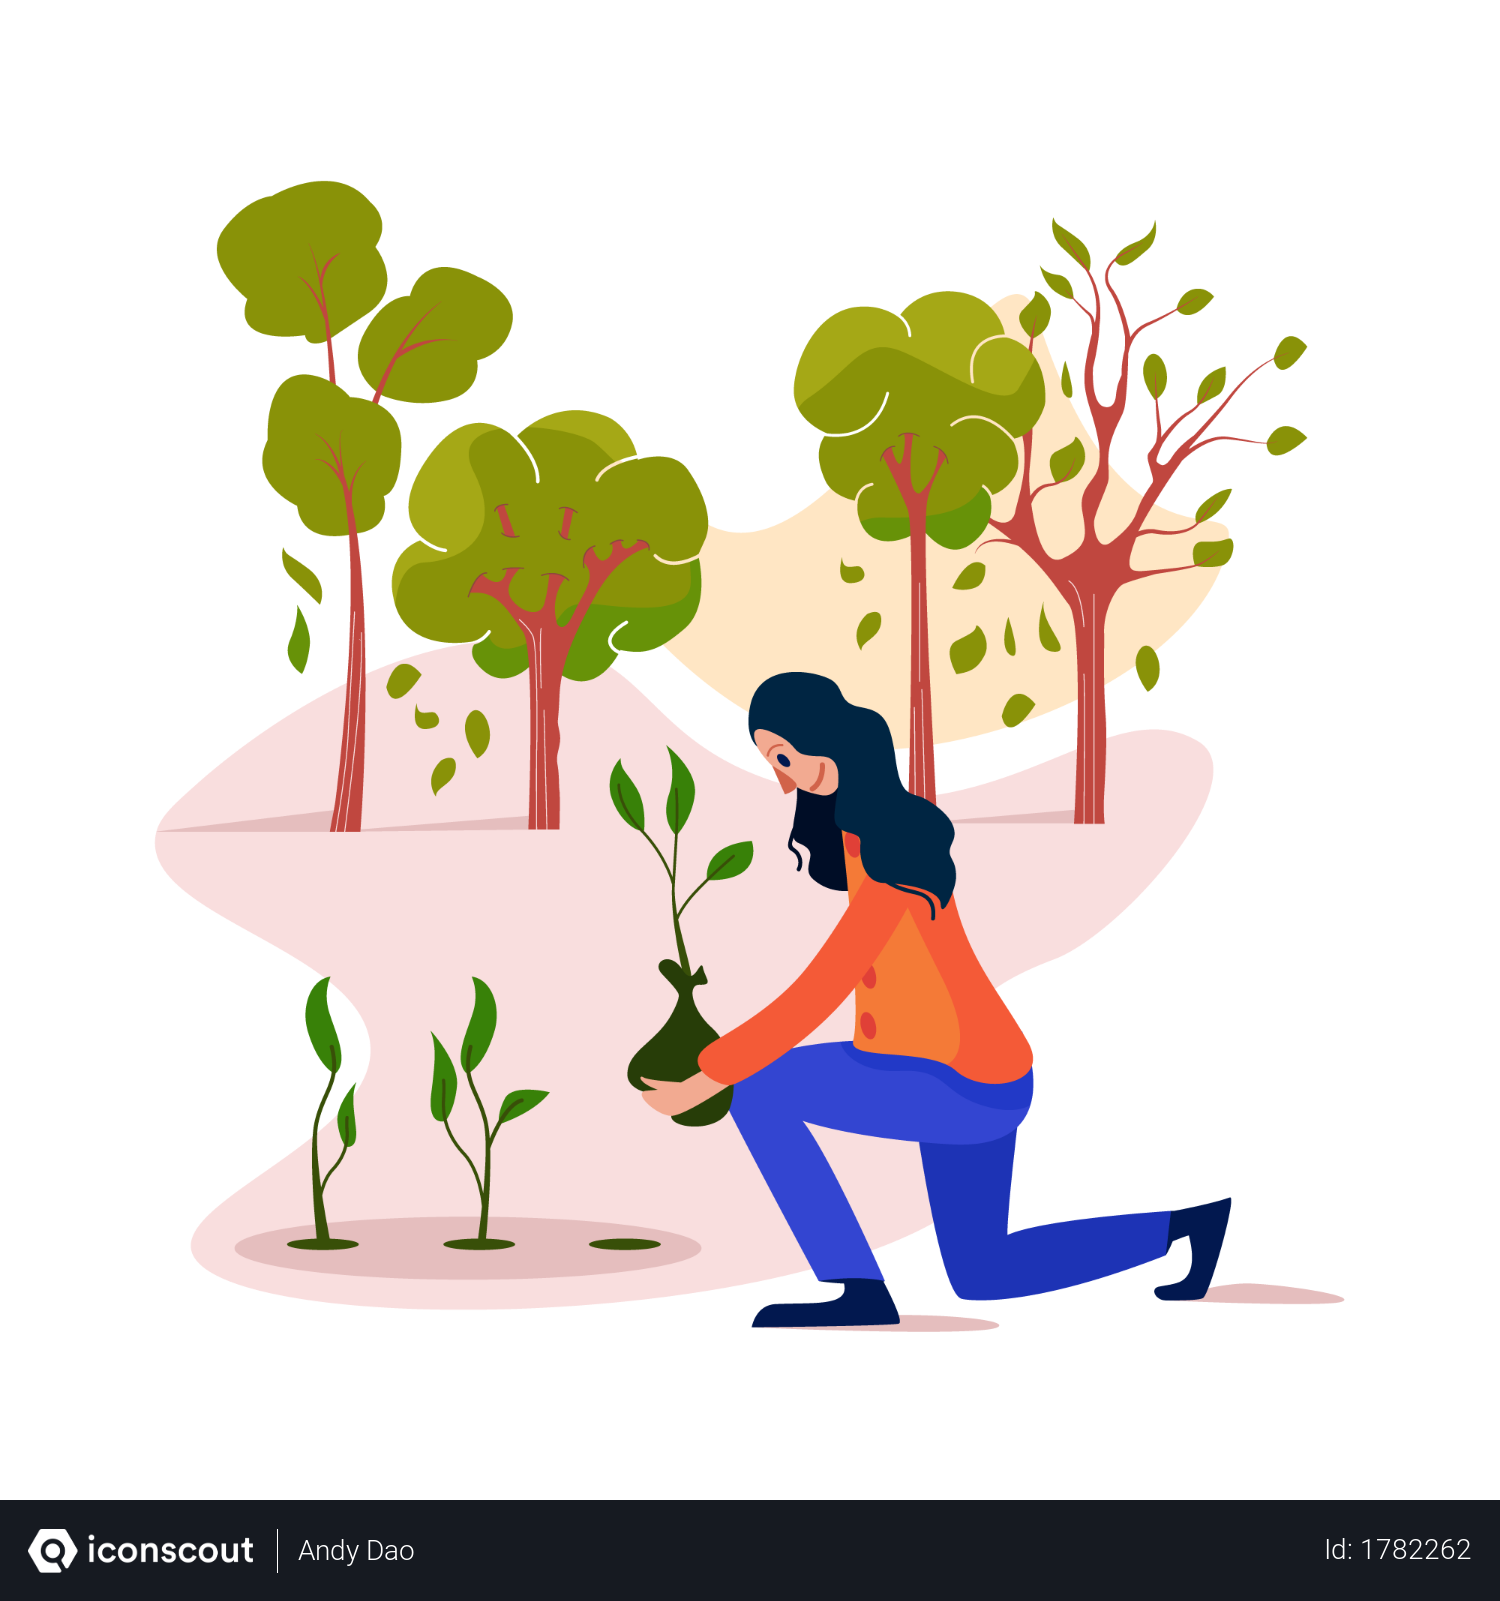 Free Plant a tree Illustration download in PNG & Vector format